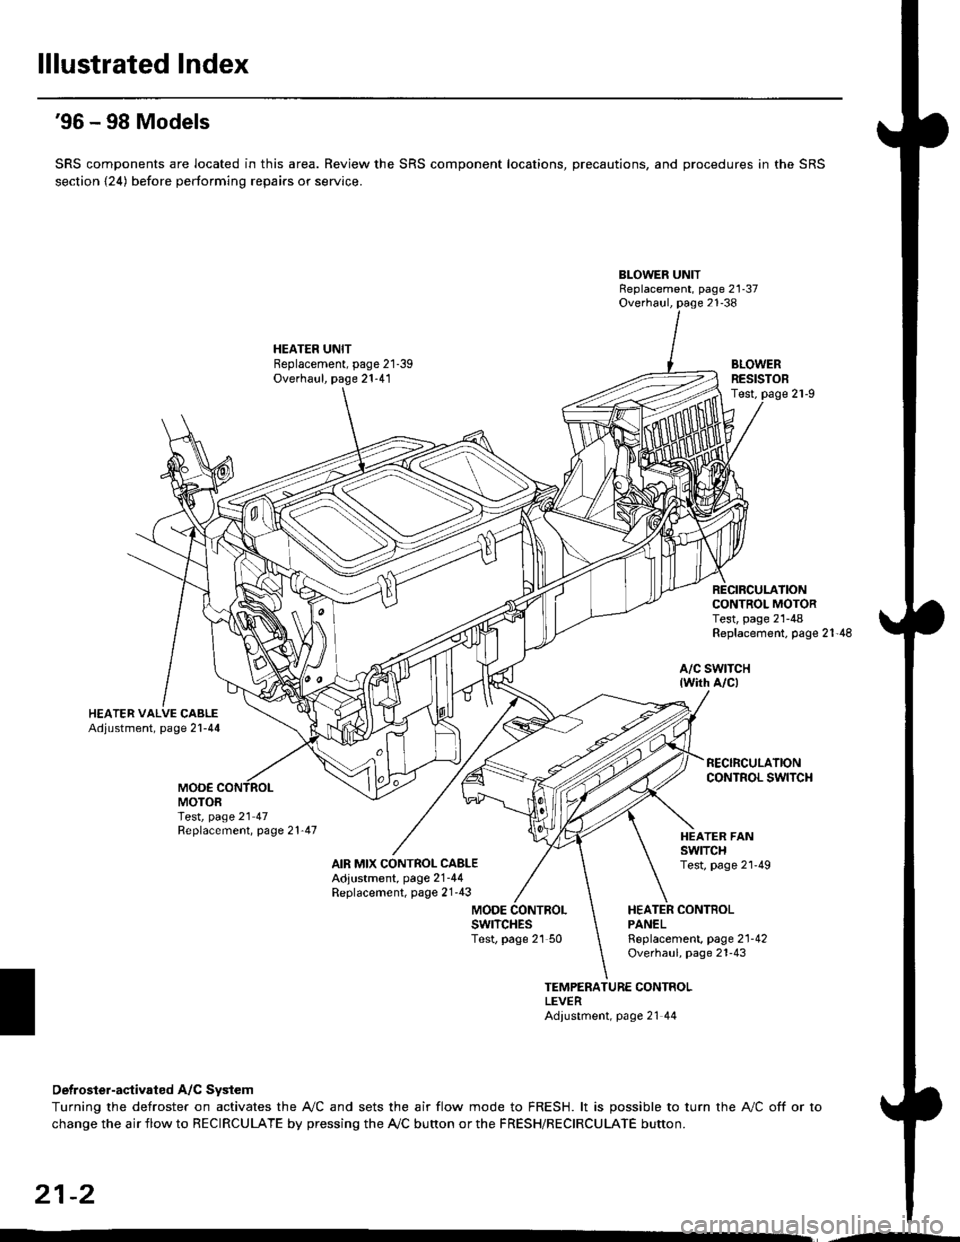 HONDA CIVIC 1996 6.G Workshop Manual lllustrated Index
96 - 98 Models
SRS components are located in this area. Review the SRS component locations, precautions, and procedures in the SRS
section {24) before performing repairs or service.